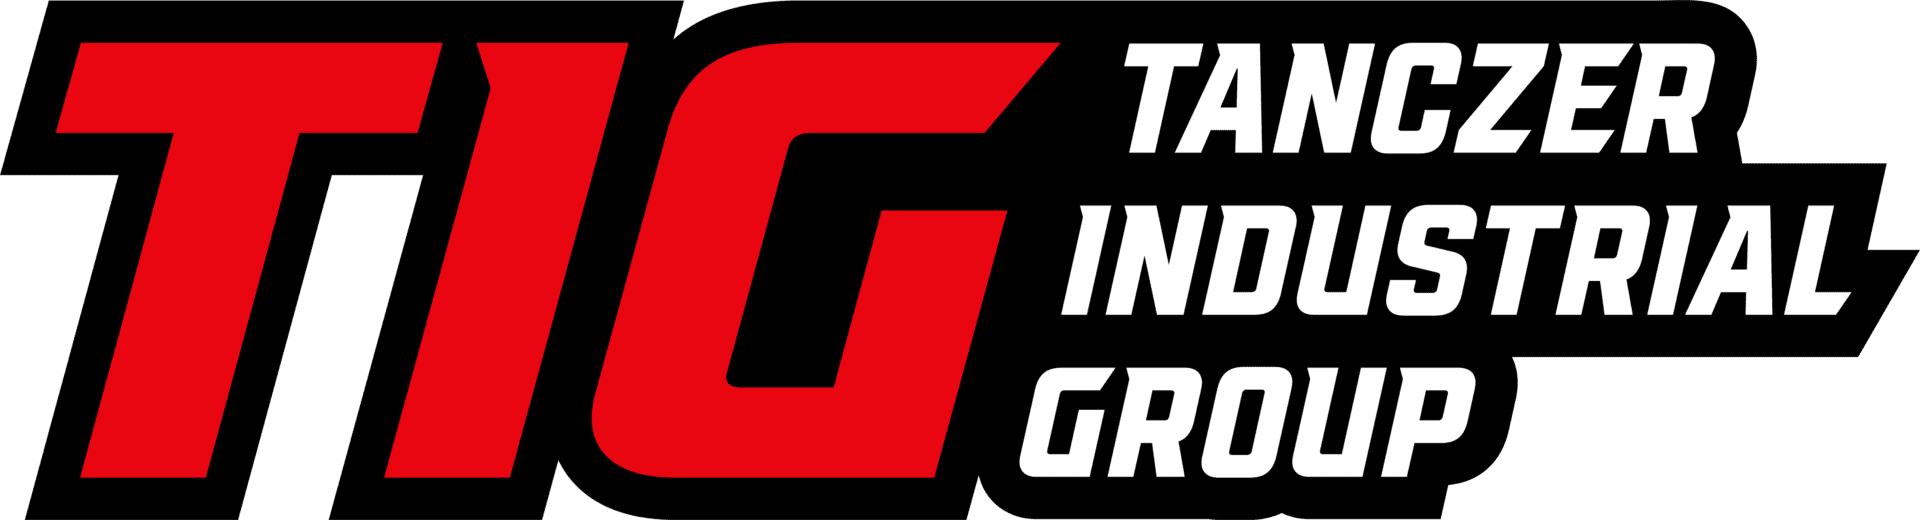 Tanner industrial group logo.